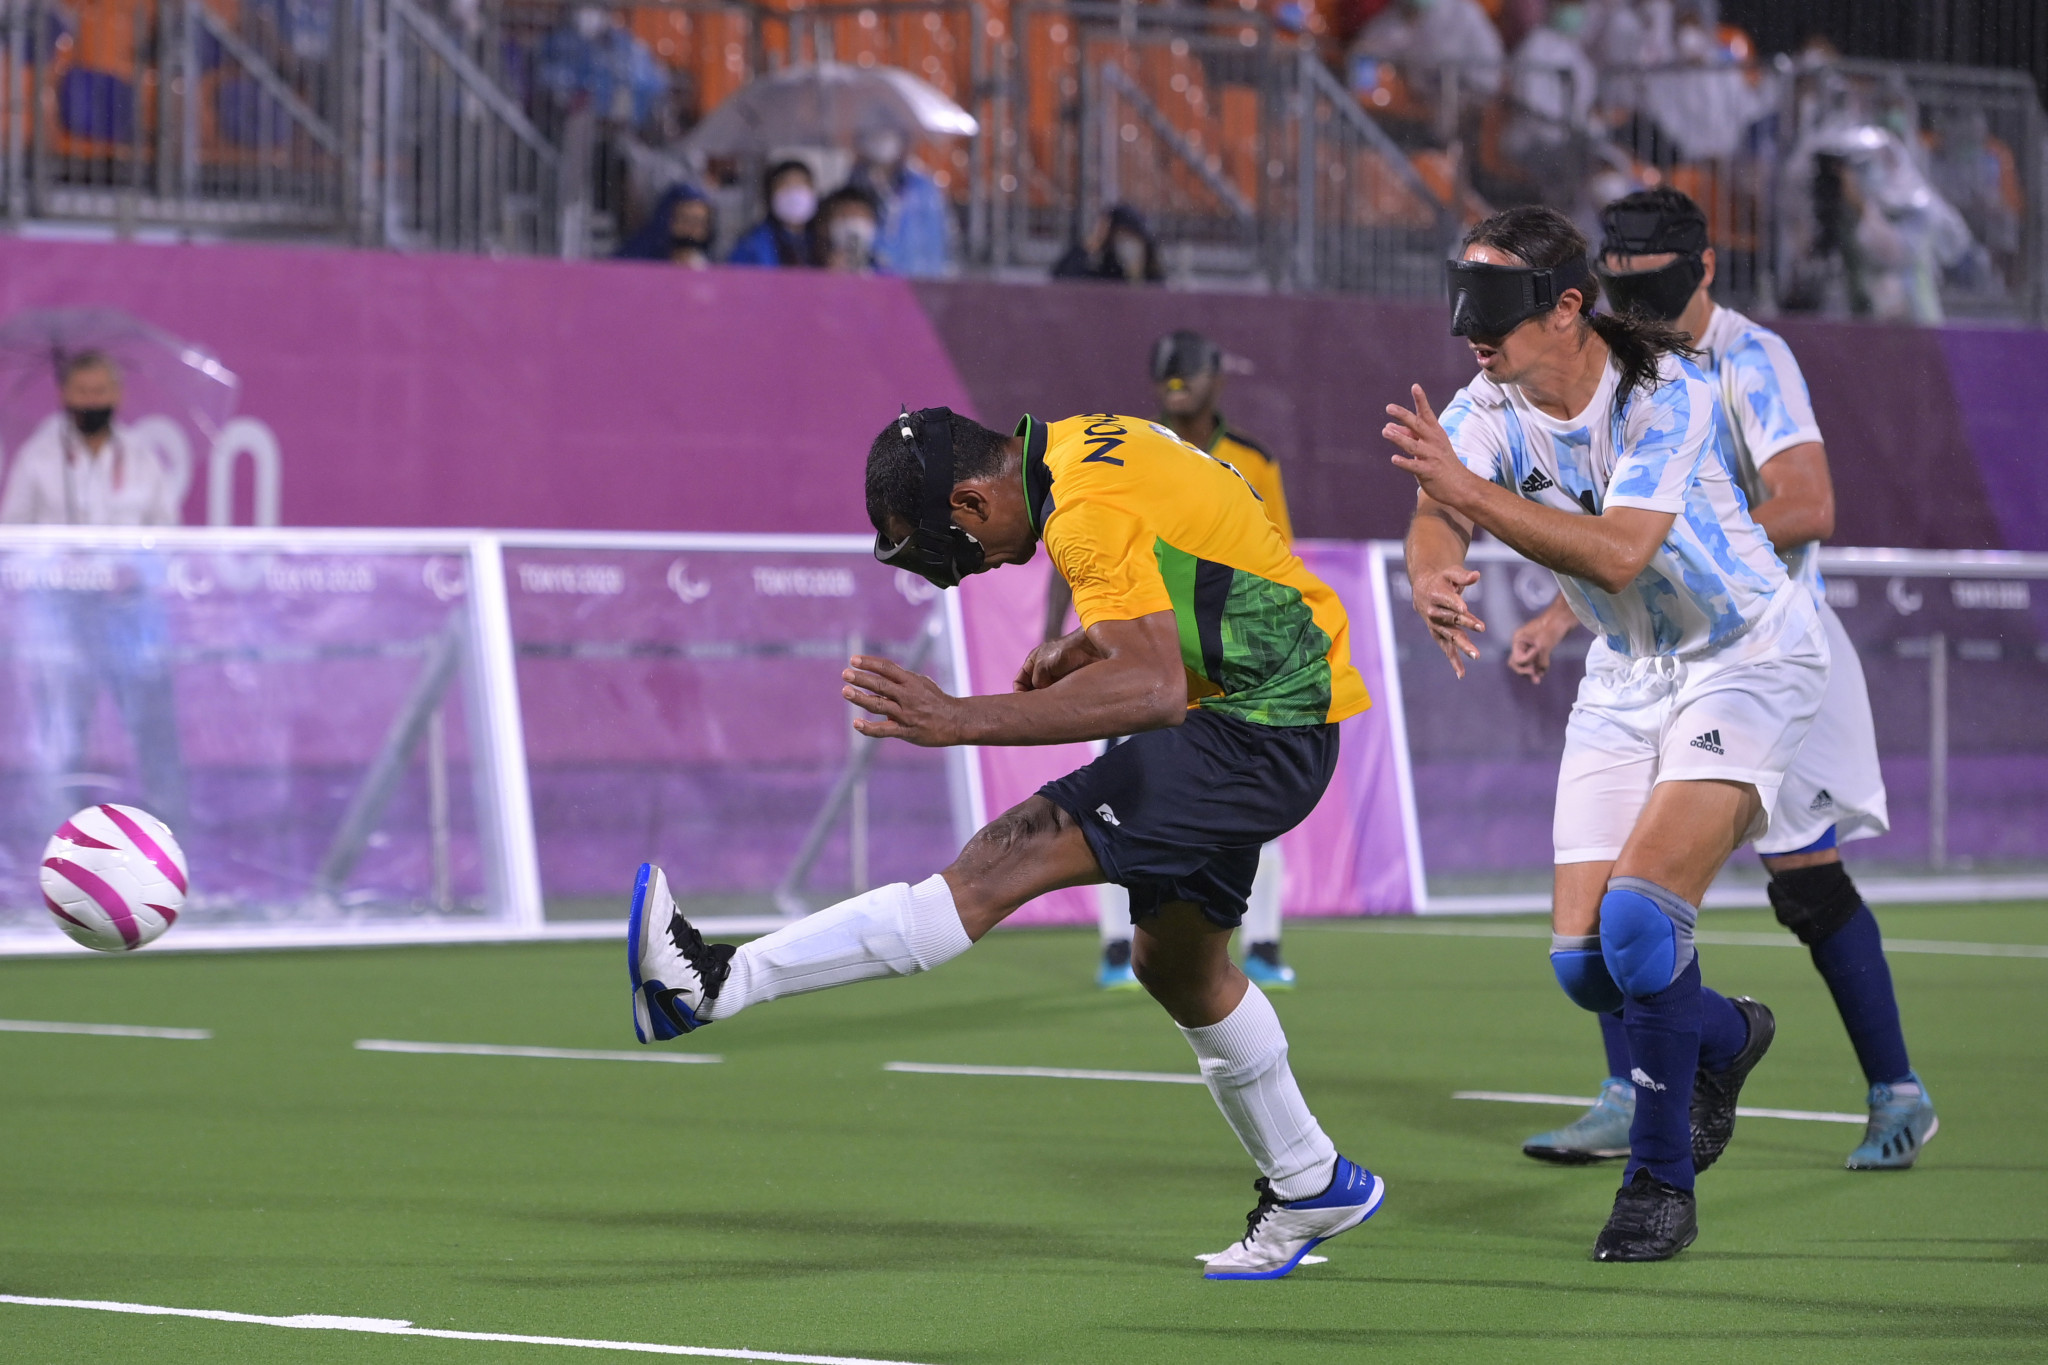 Men's blind football was on the programme at the Tokyo 2020 Paralympics, with Brazil winning gold ©Getty Images
